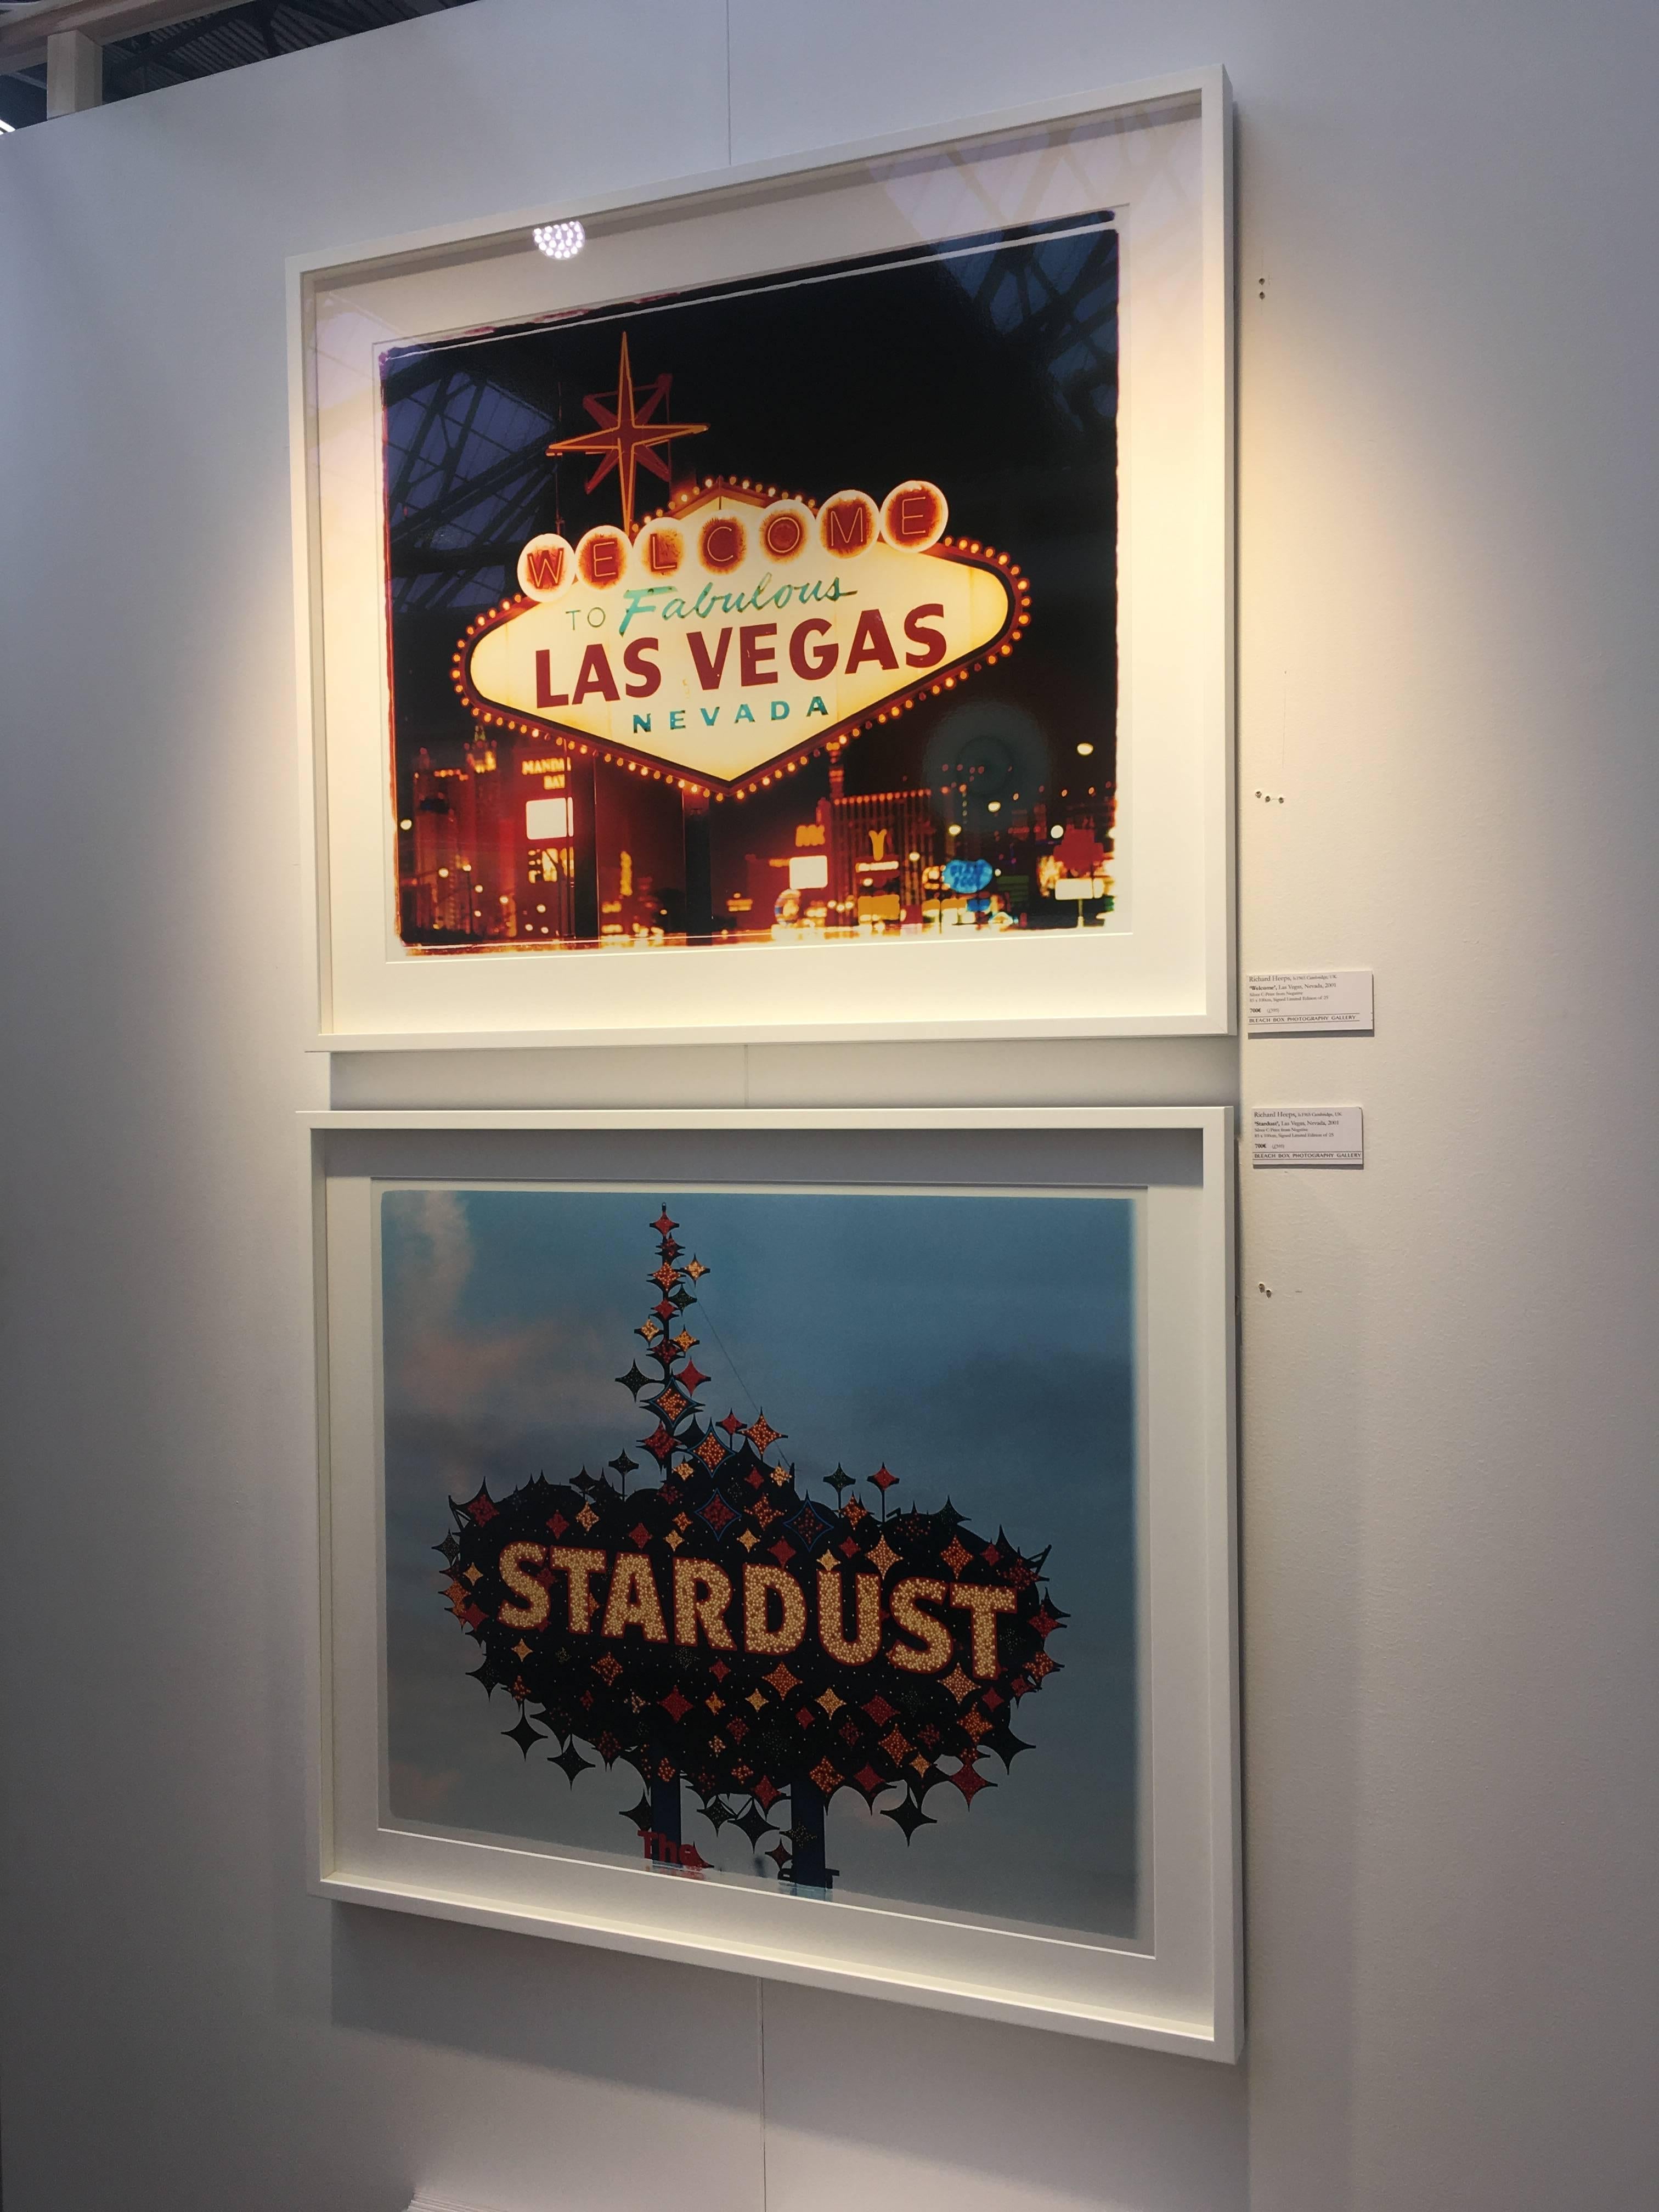 This cool picture has a classic Americana feel. Richard Heeps pictures beautifully capture parts of Las Vegas which are no longer there. This iconic 'Stardust' sign presented here almost looks like a painting.

This artwork is a limited edition of